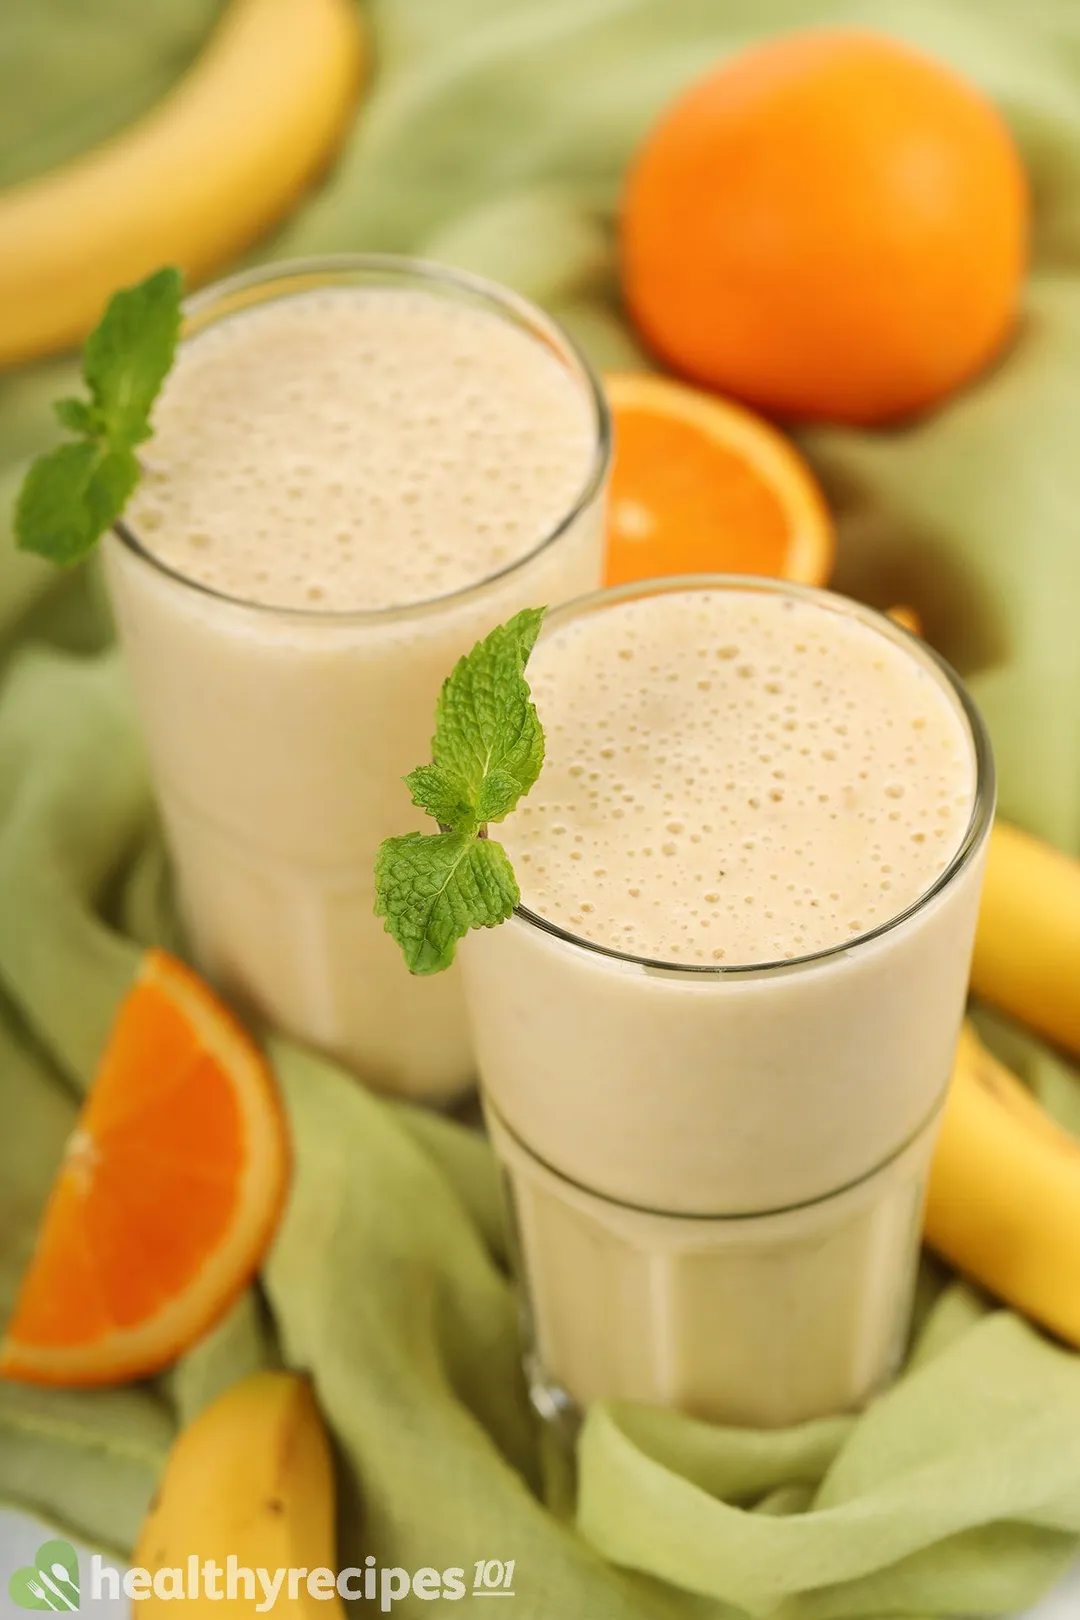 Two glasses of Orange Banana Smoothie placed on a green cloth near orange slices and unpeeled yellow bananas.